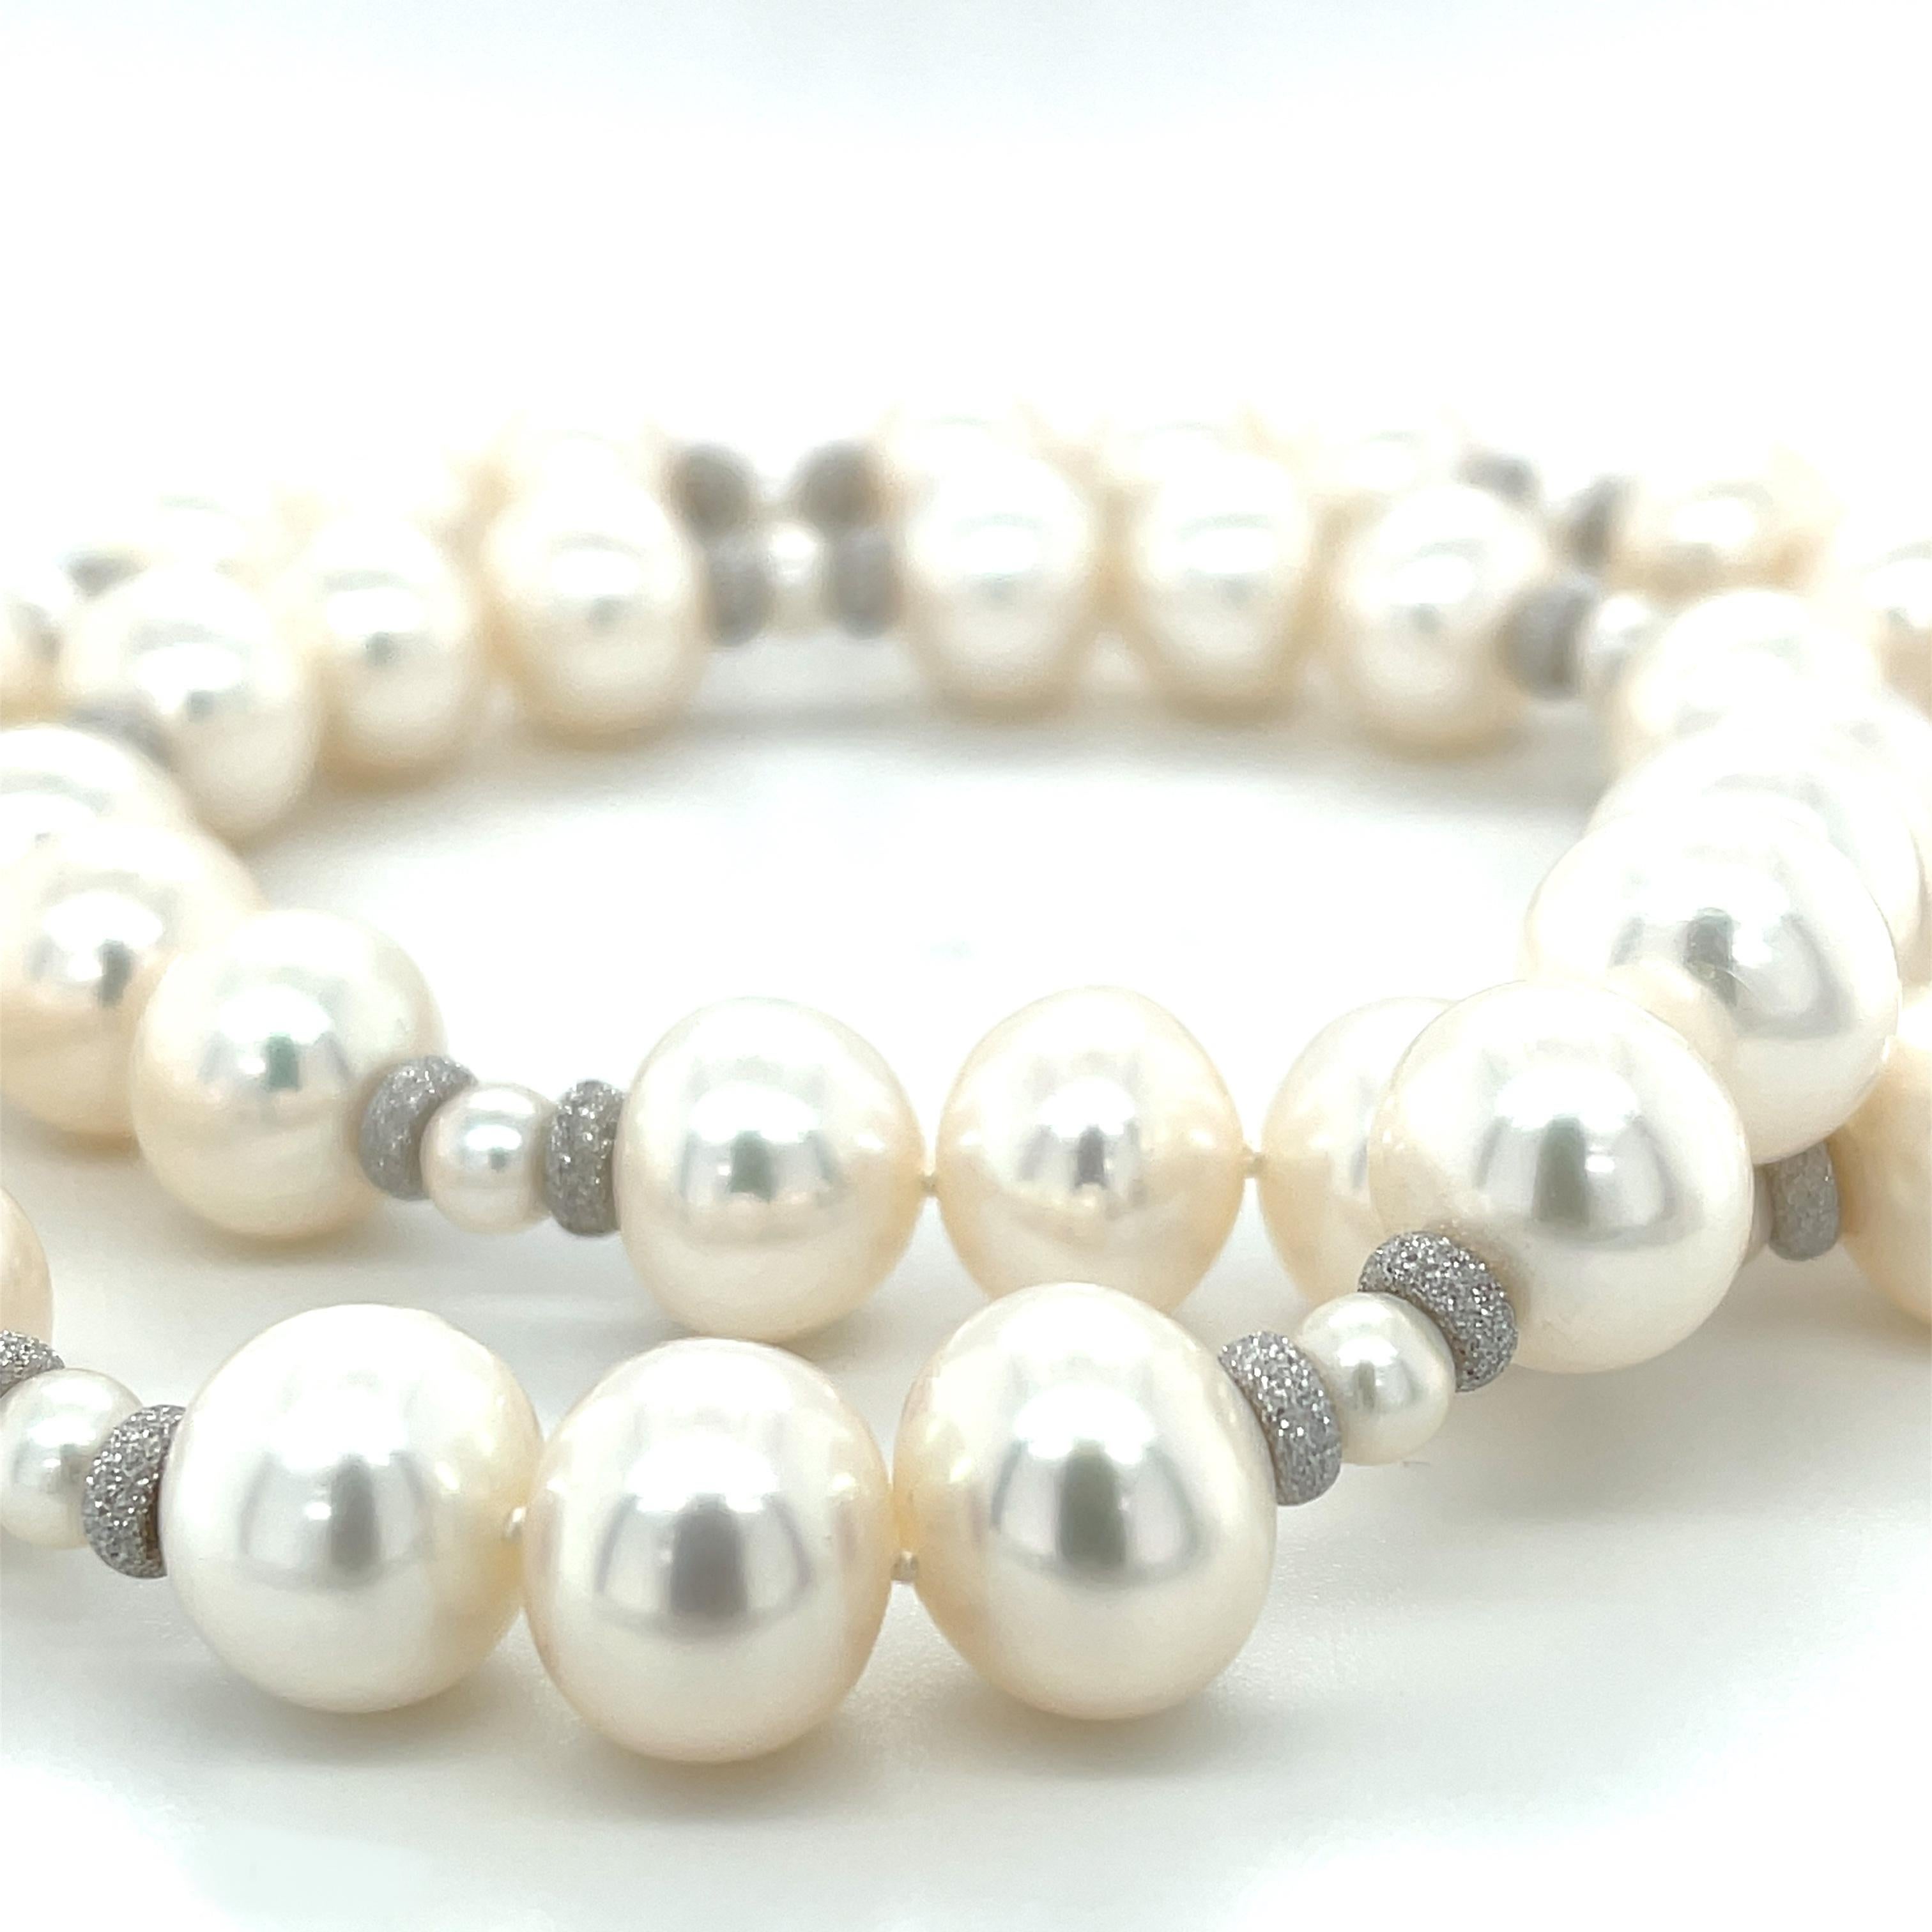 Artisan White Freshwater Pearl Necklace with White Gold Accents, 18.5 Inches For Sale